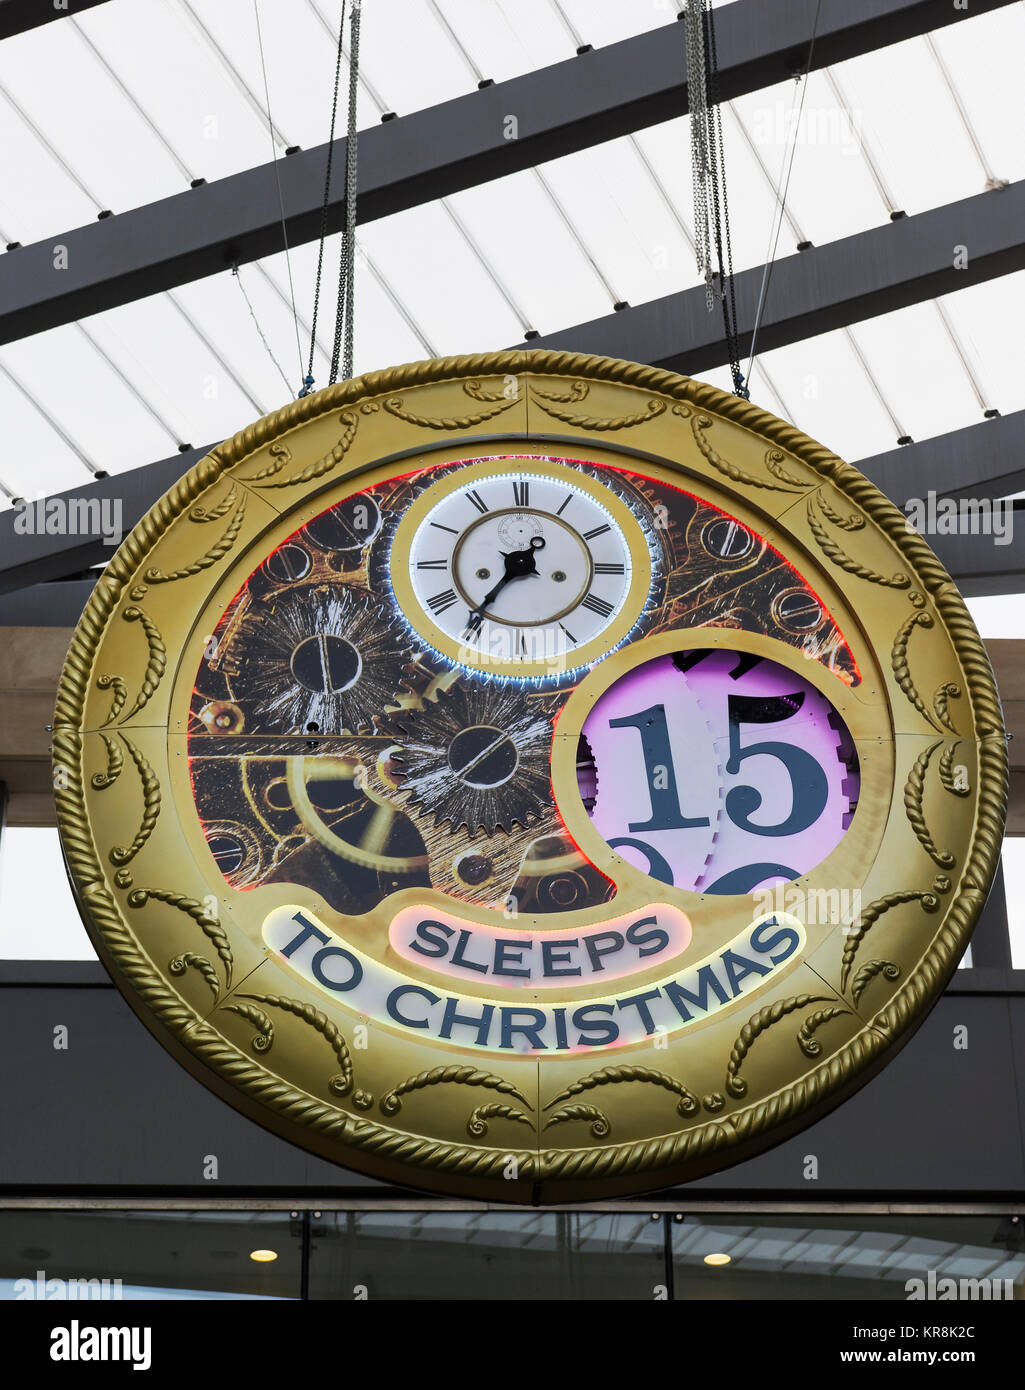 Clock in the likeness of a pocket watch counting down sleeps to Christmas at the entrance to Eldon square shopping centre on Northumberland Street, UK Stock Photo